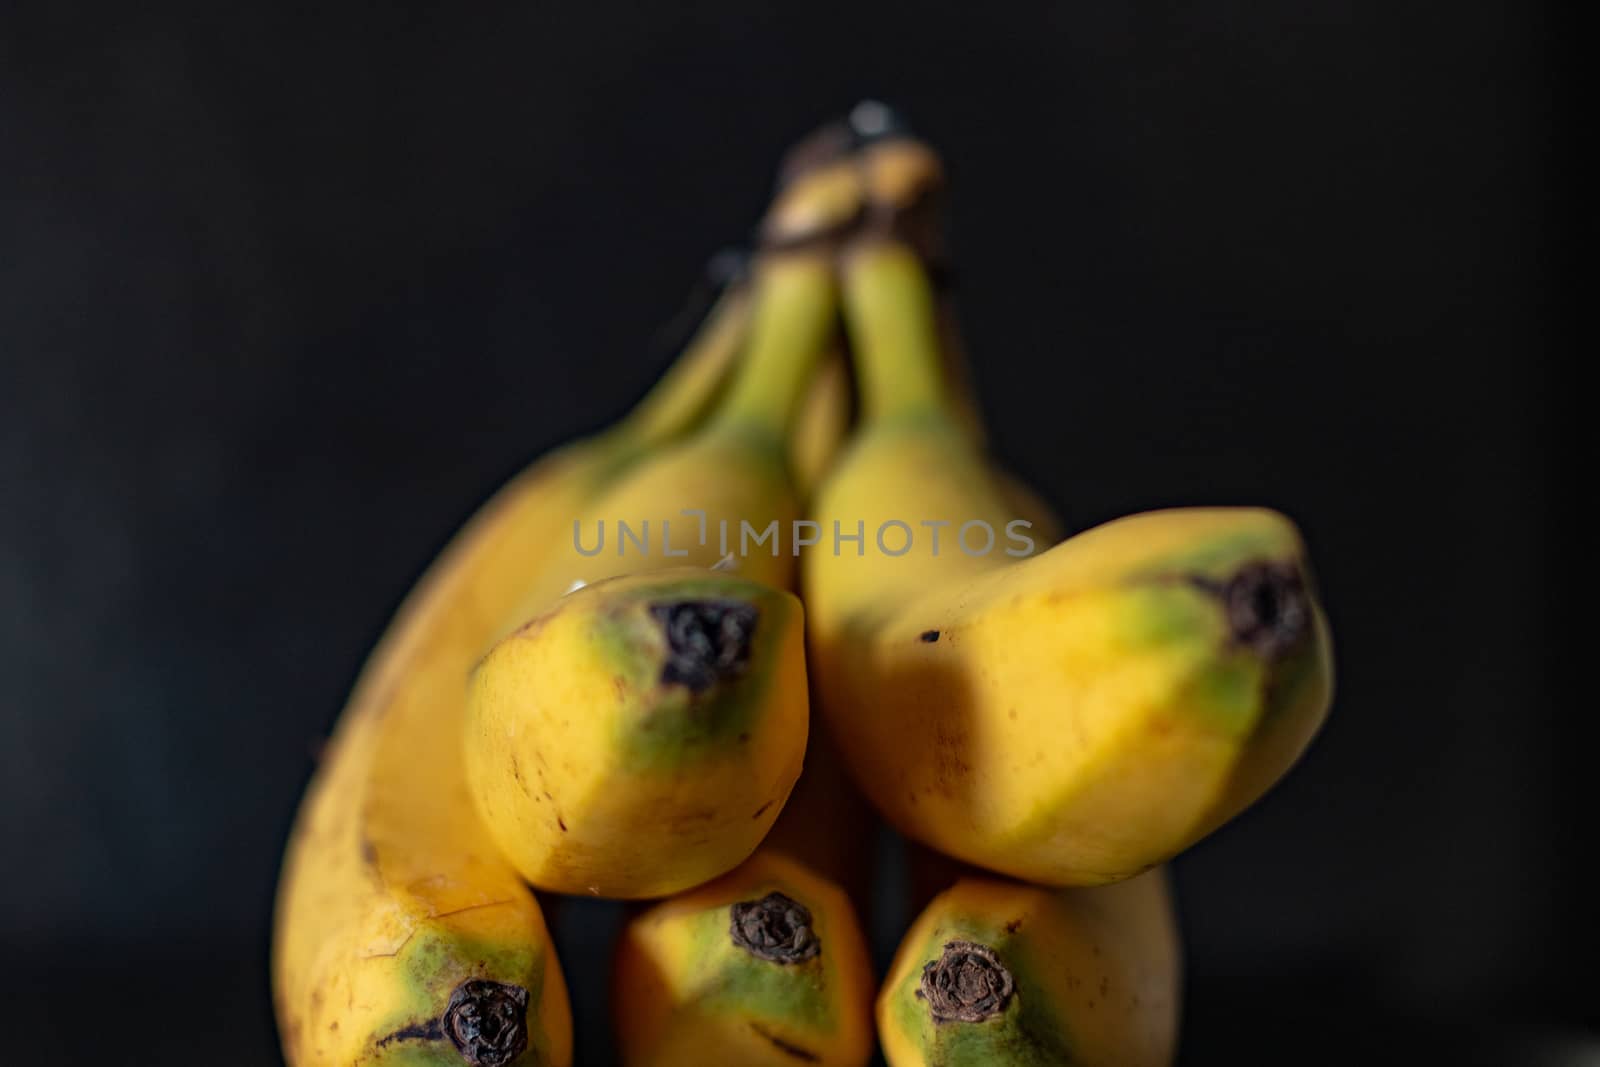 Group of bananas on a black background